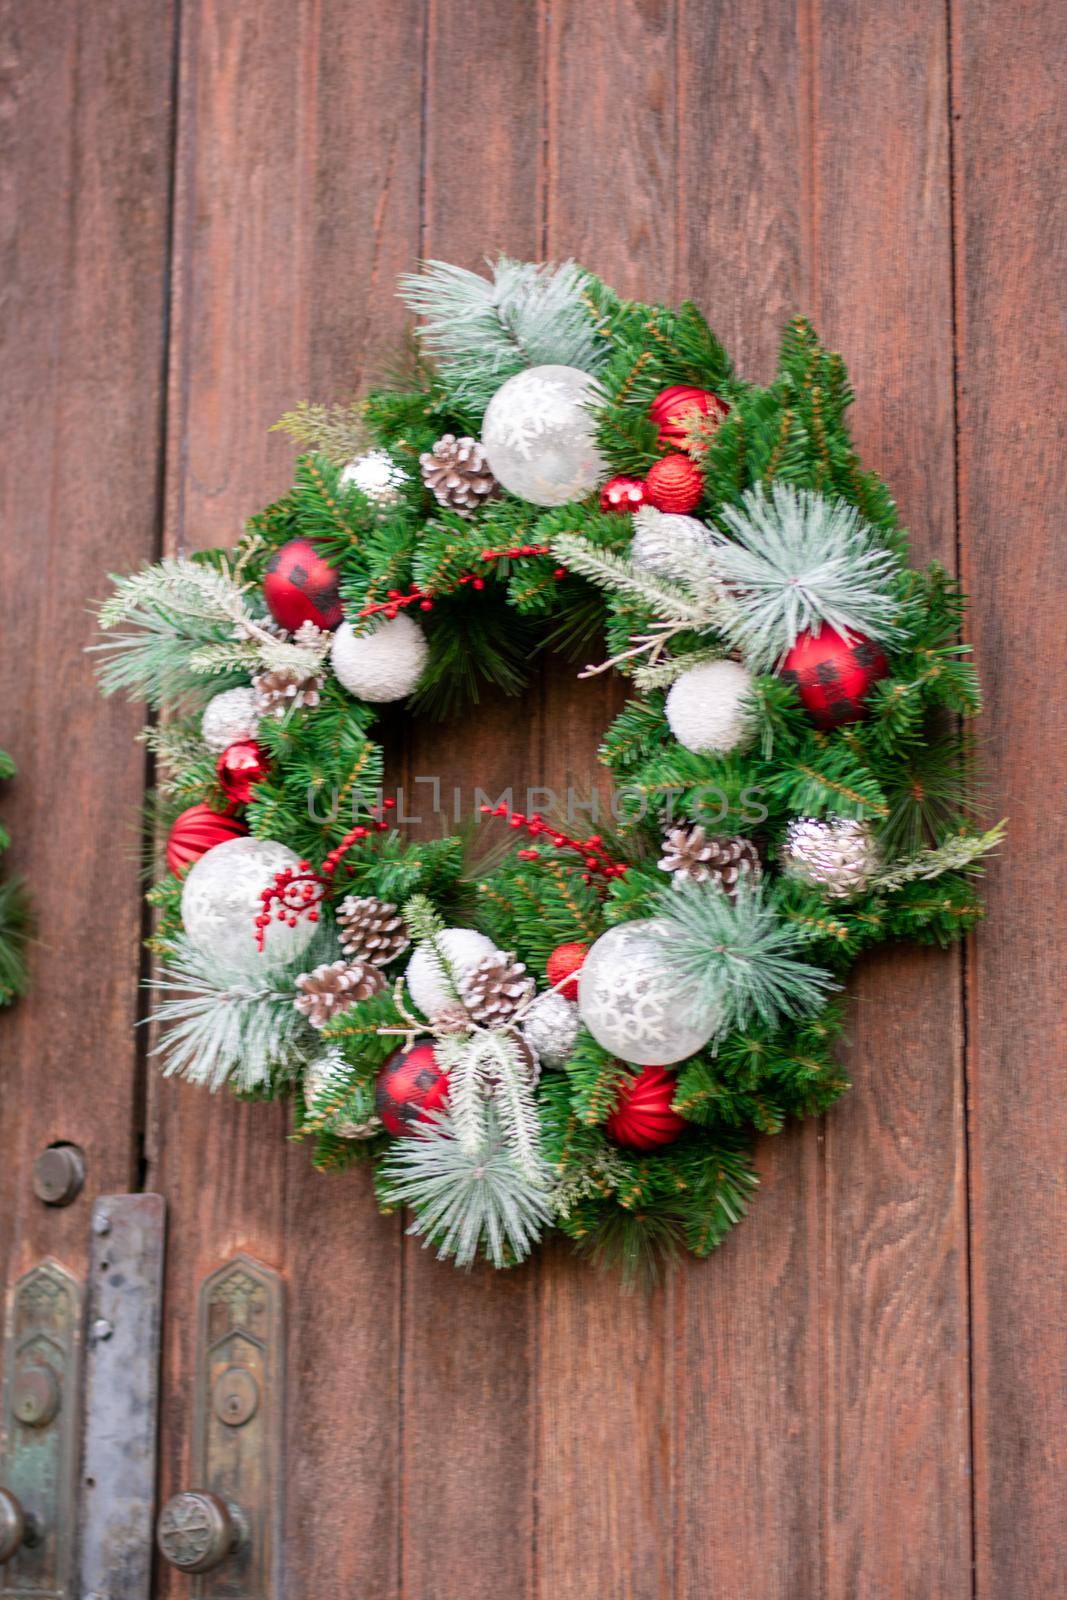 A Christmas Wreath on a Wooden Door by bju12290